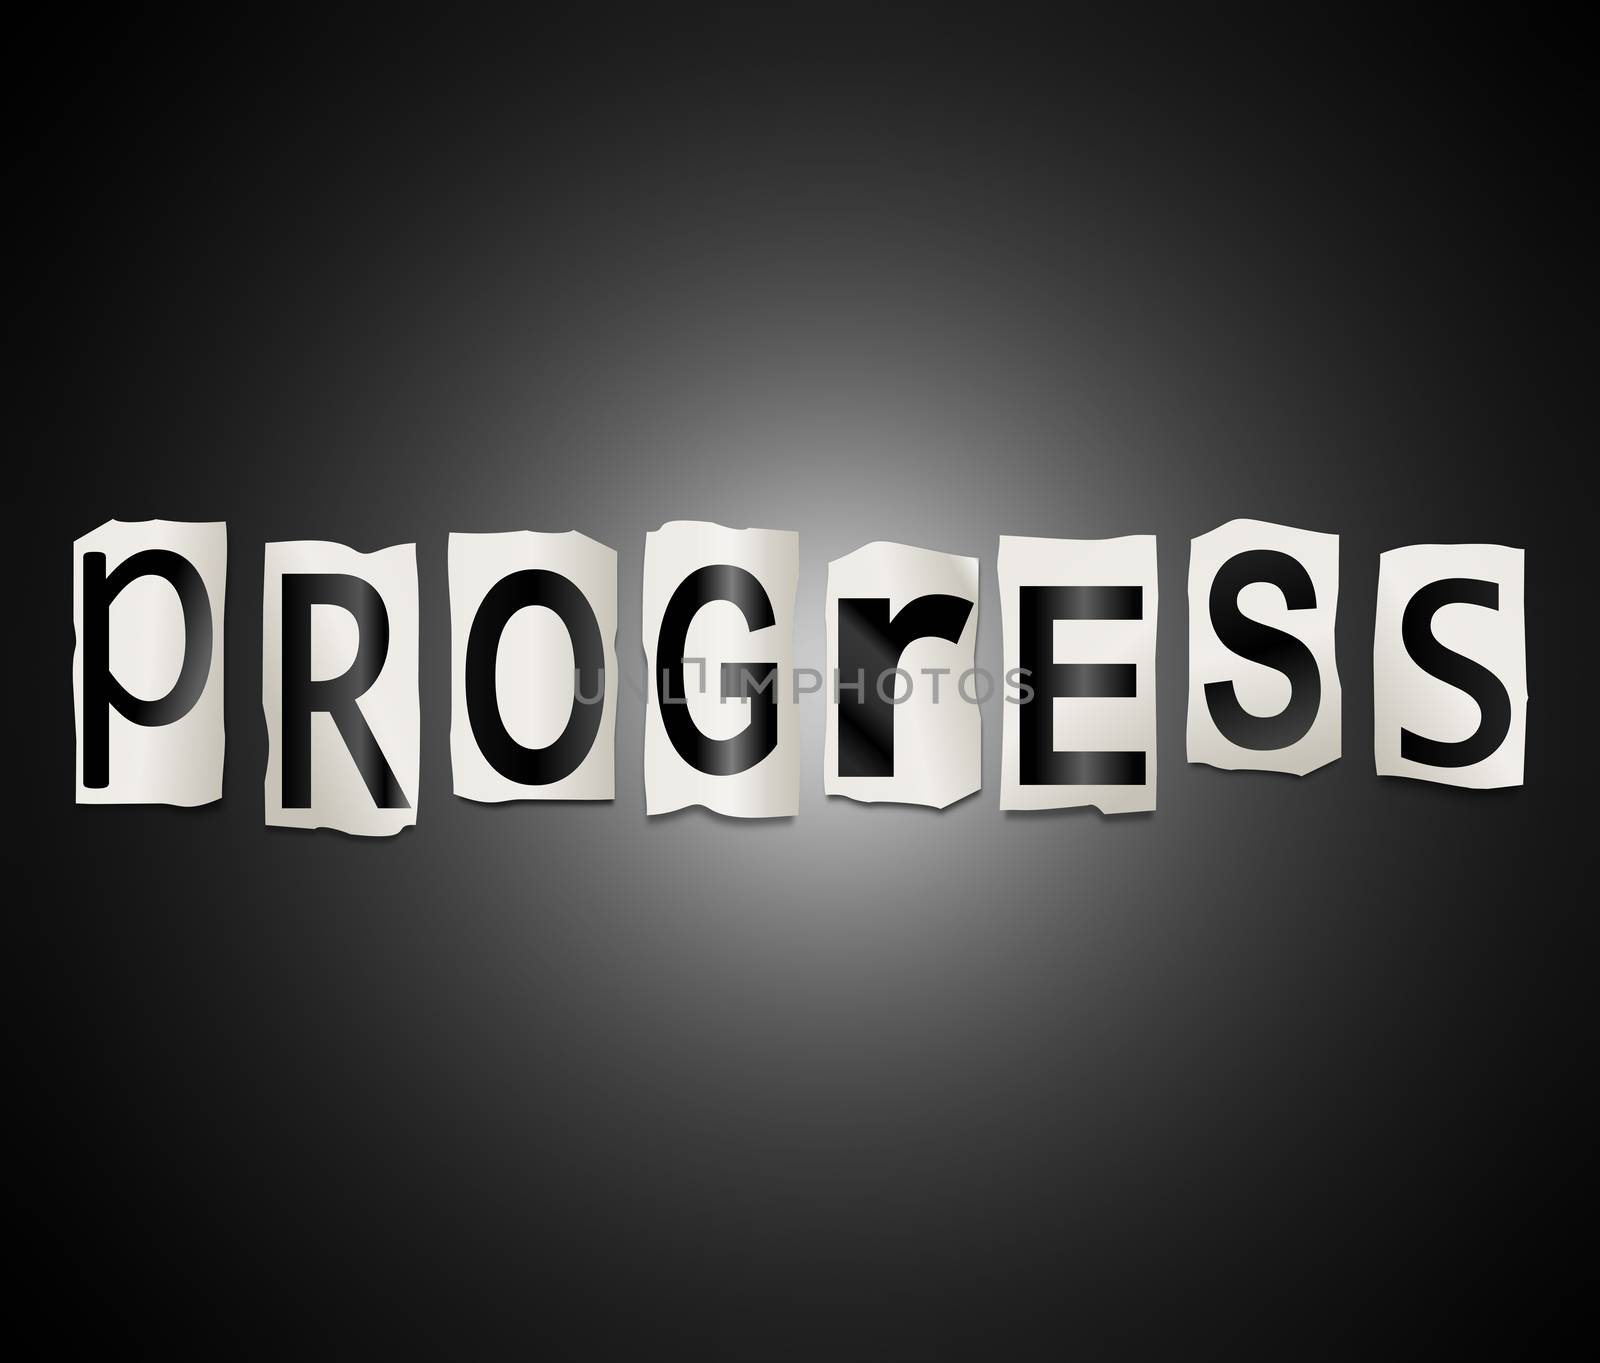 Illustration depicting a set of cut out printed letters arranged to form the word progress.